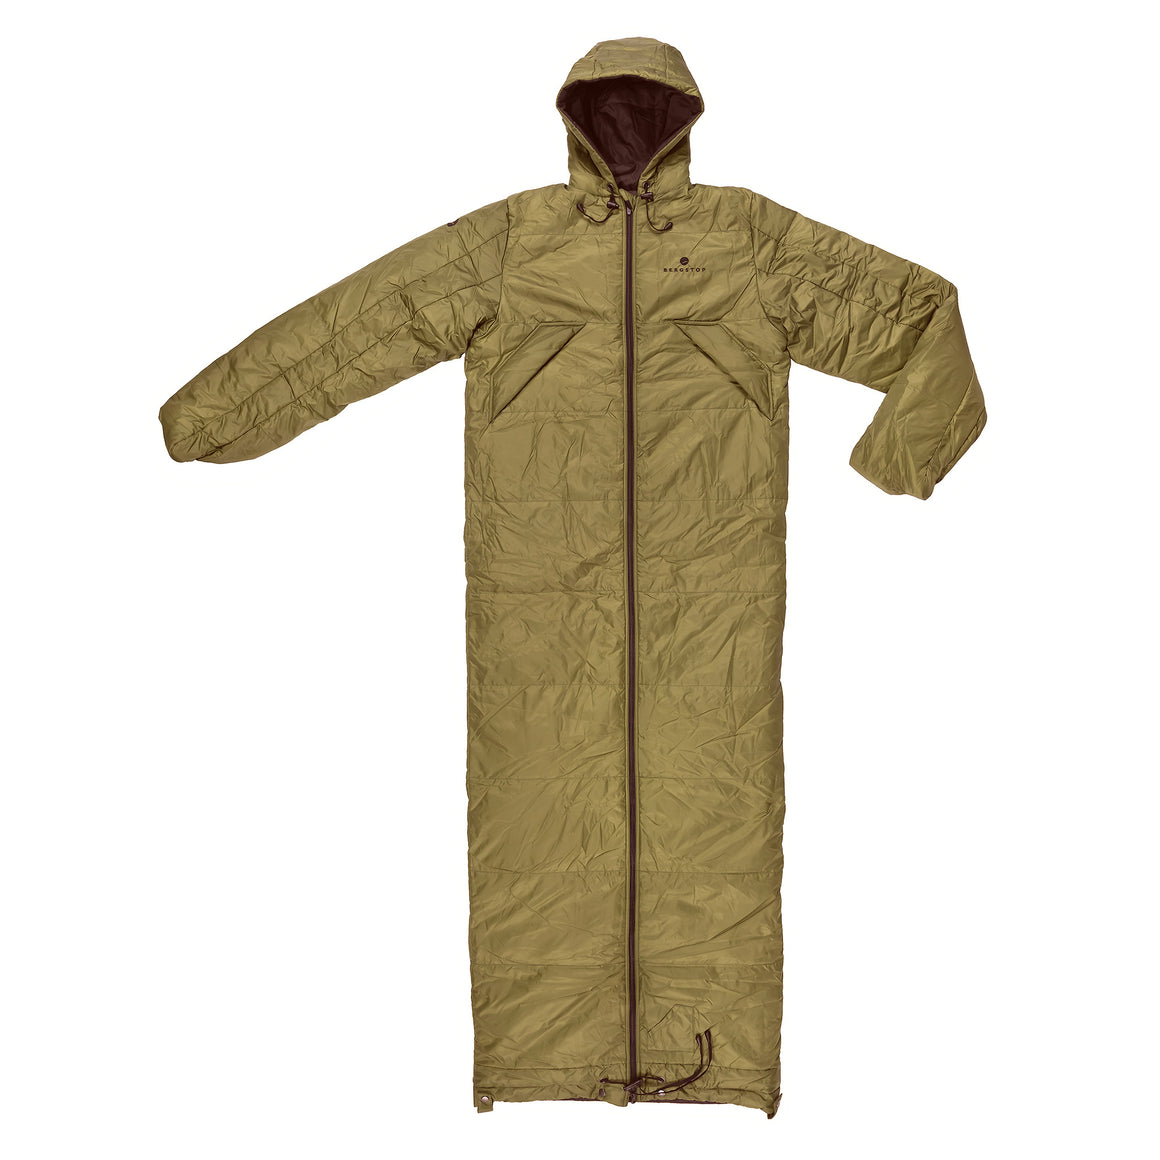 Military Sleeping Bag Suit with Sleeves and Hood Insulated